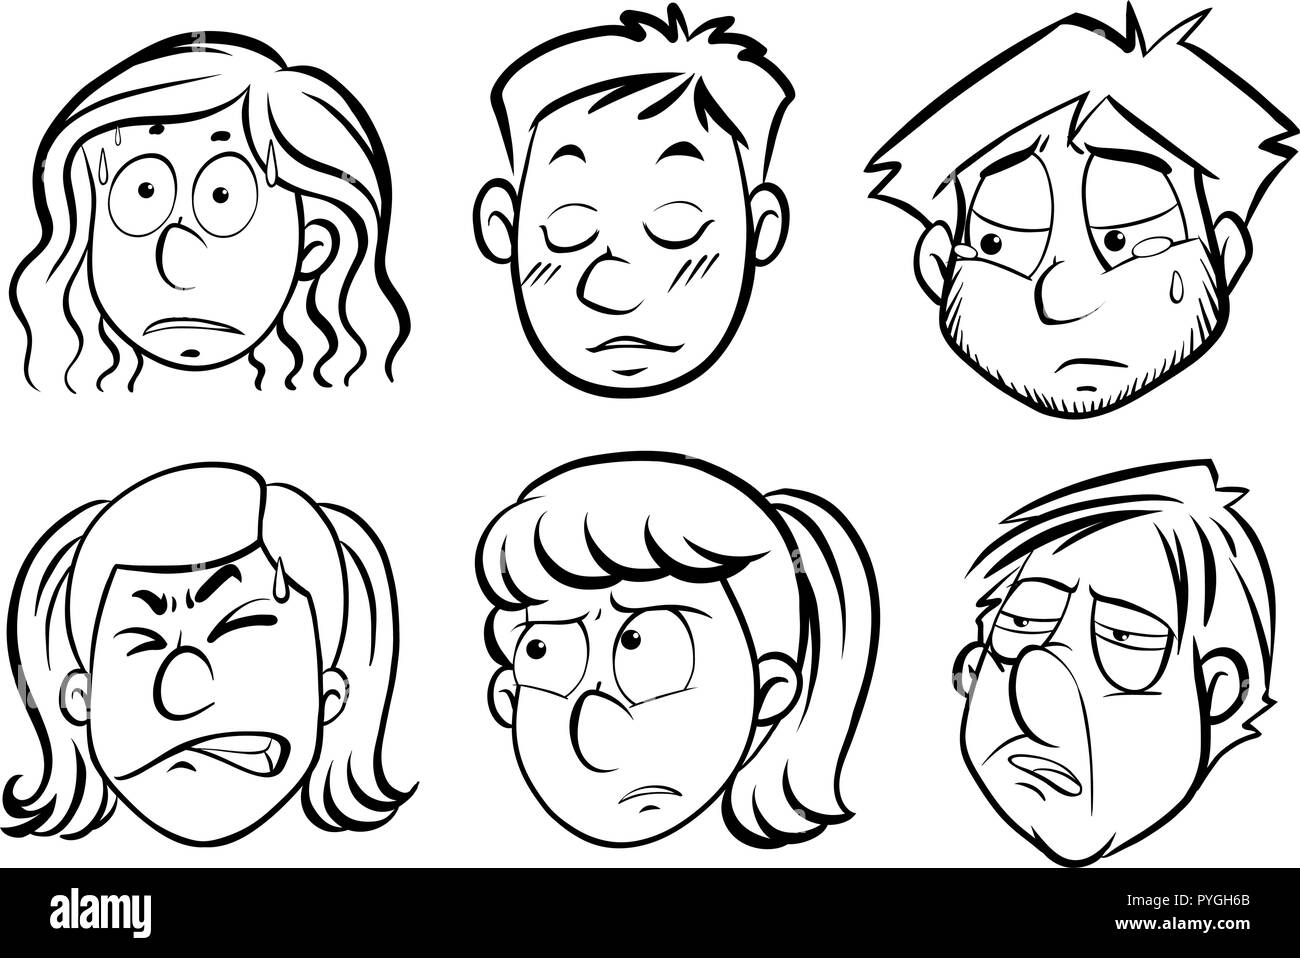 Human faces clip art Black and White Stock Photos & Images - Alamy